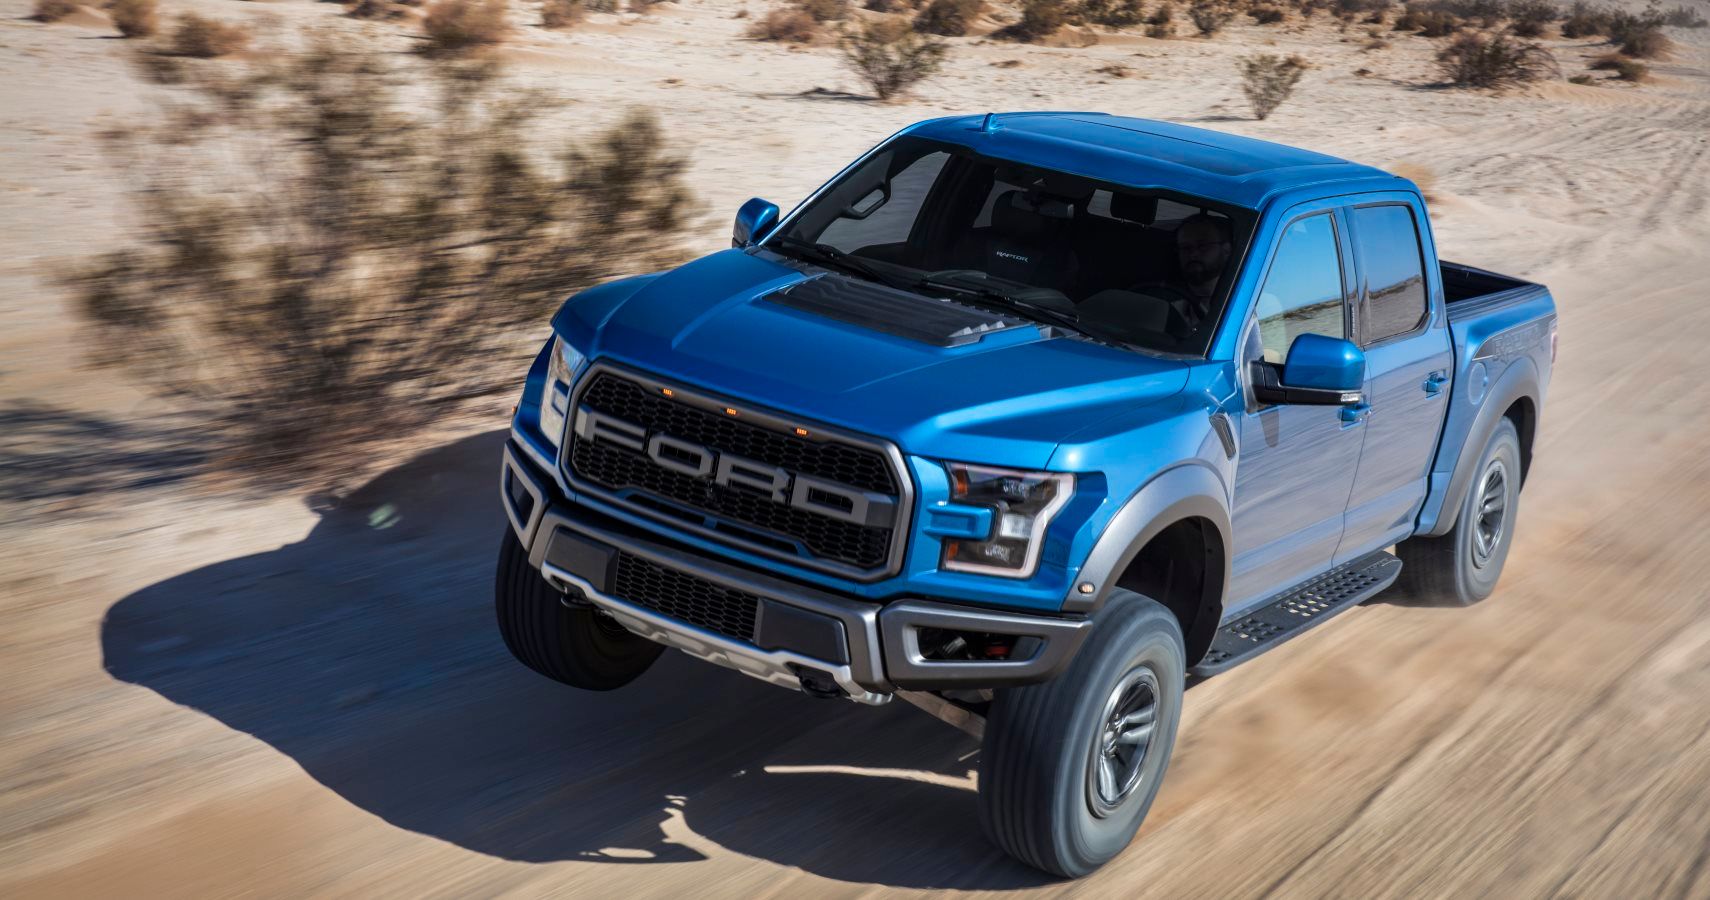 Ford is making its iconic F-150 Raptor – the ultimate high-performance off-road pickup – even better with upgraded technology including class-exclusive, electronically controlled FOX Racing Shox, new Trail Control™ and all-new Recaro sport seats.